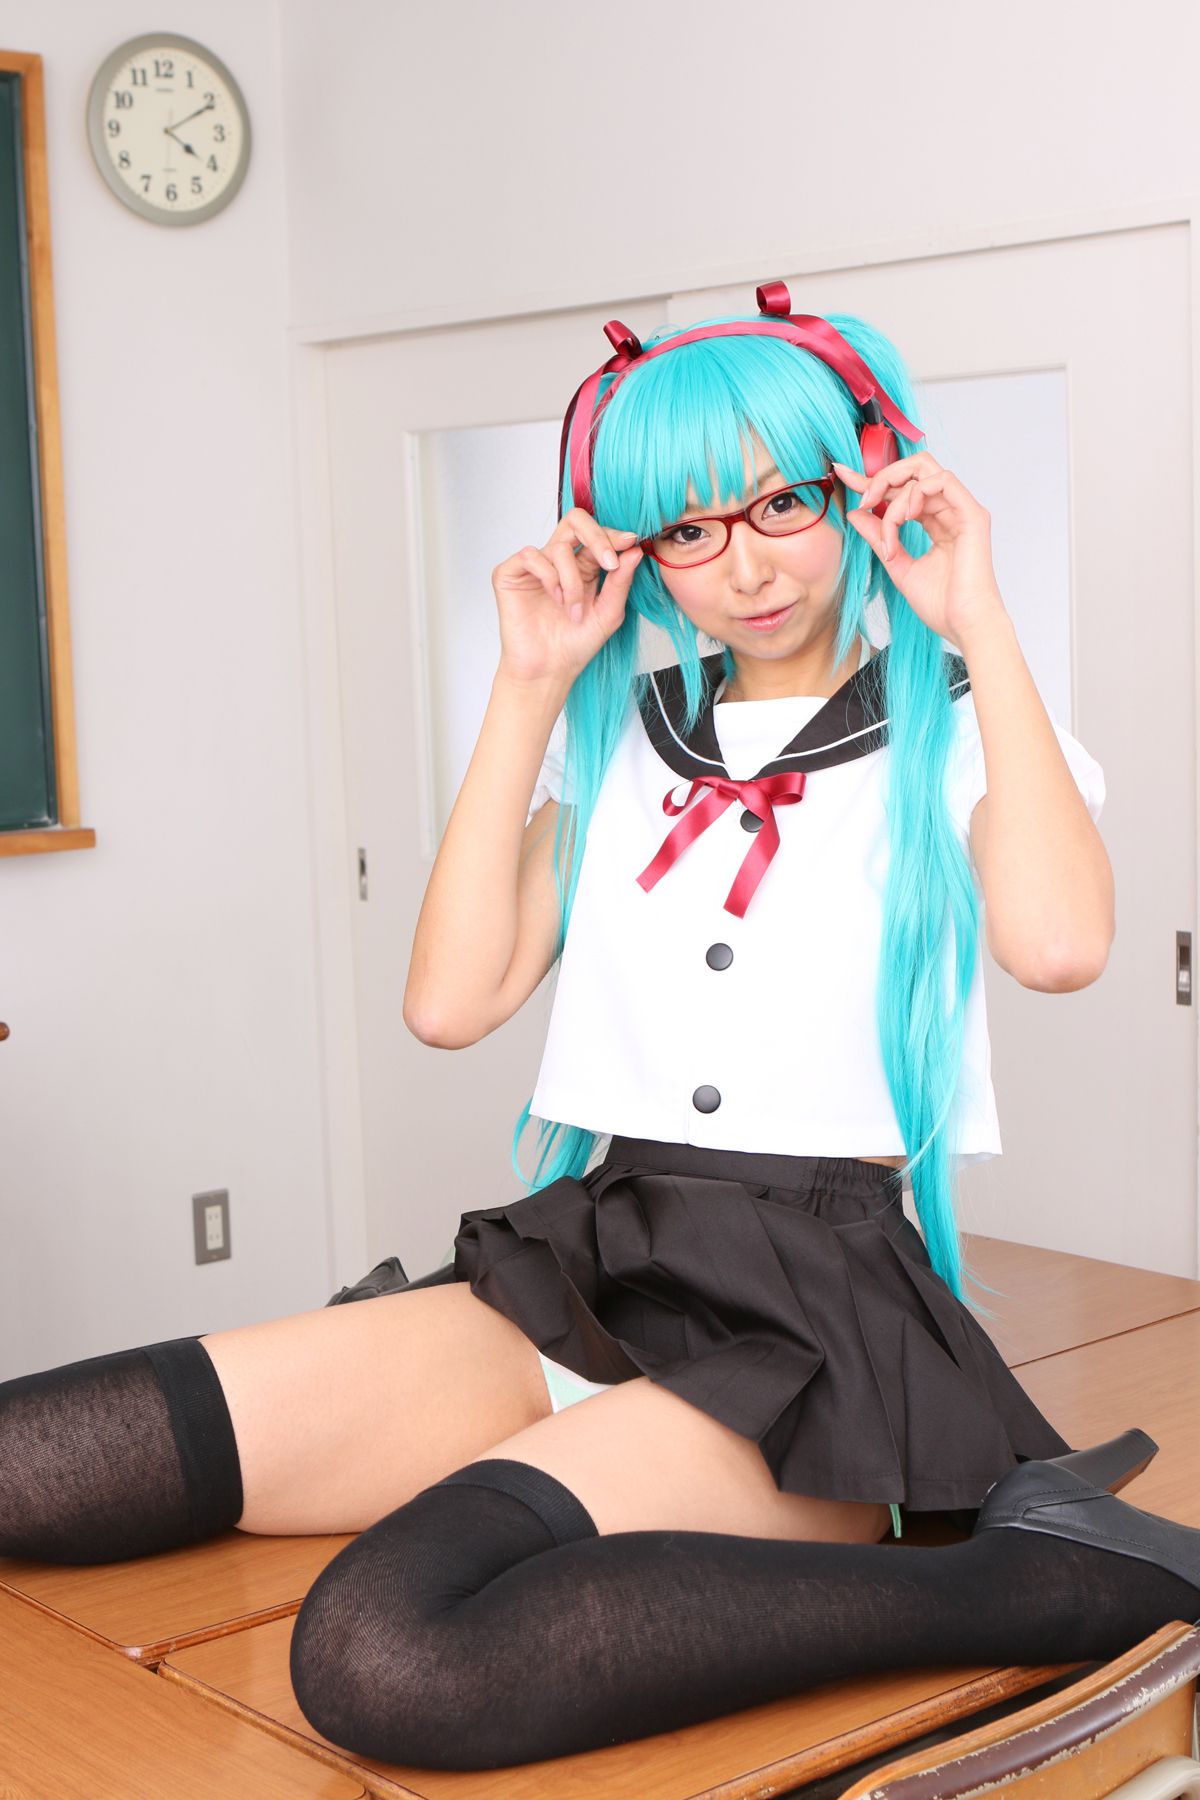 taotuhome[Cosplay套图] New Hatsune Miku from Vocaloid - So Sexy第185张